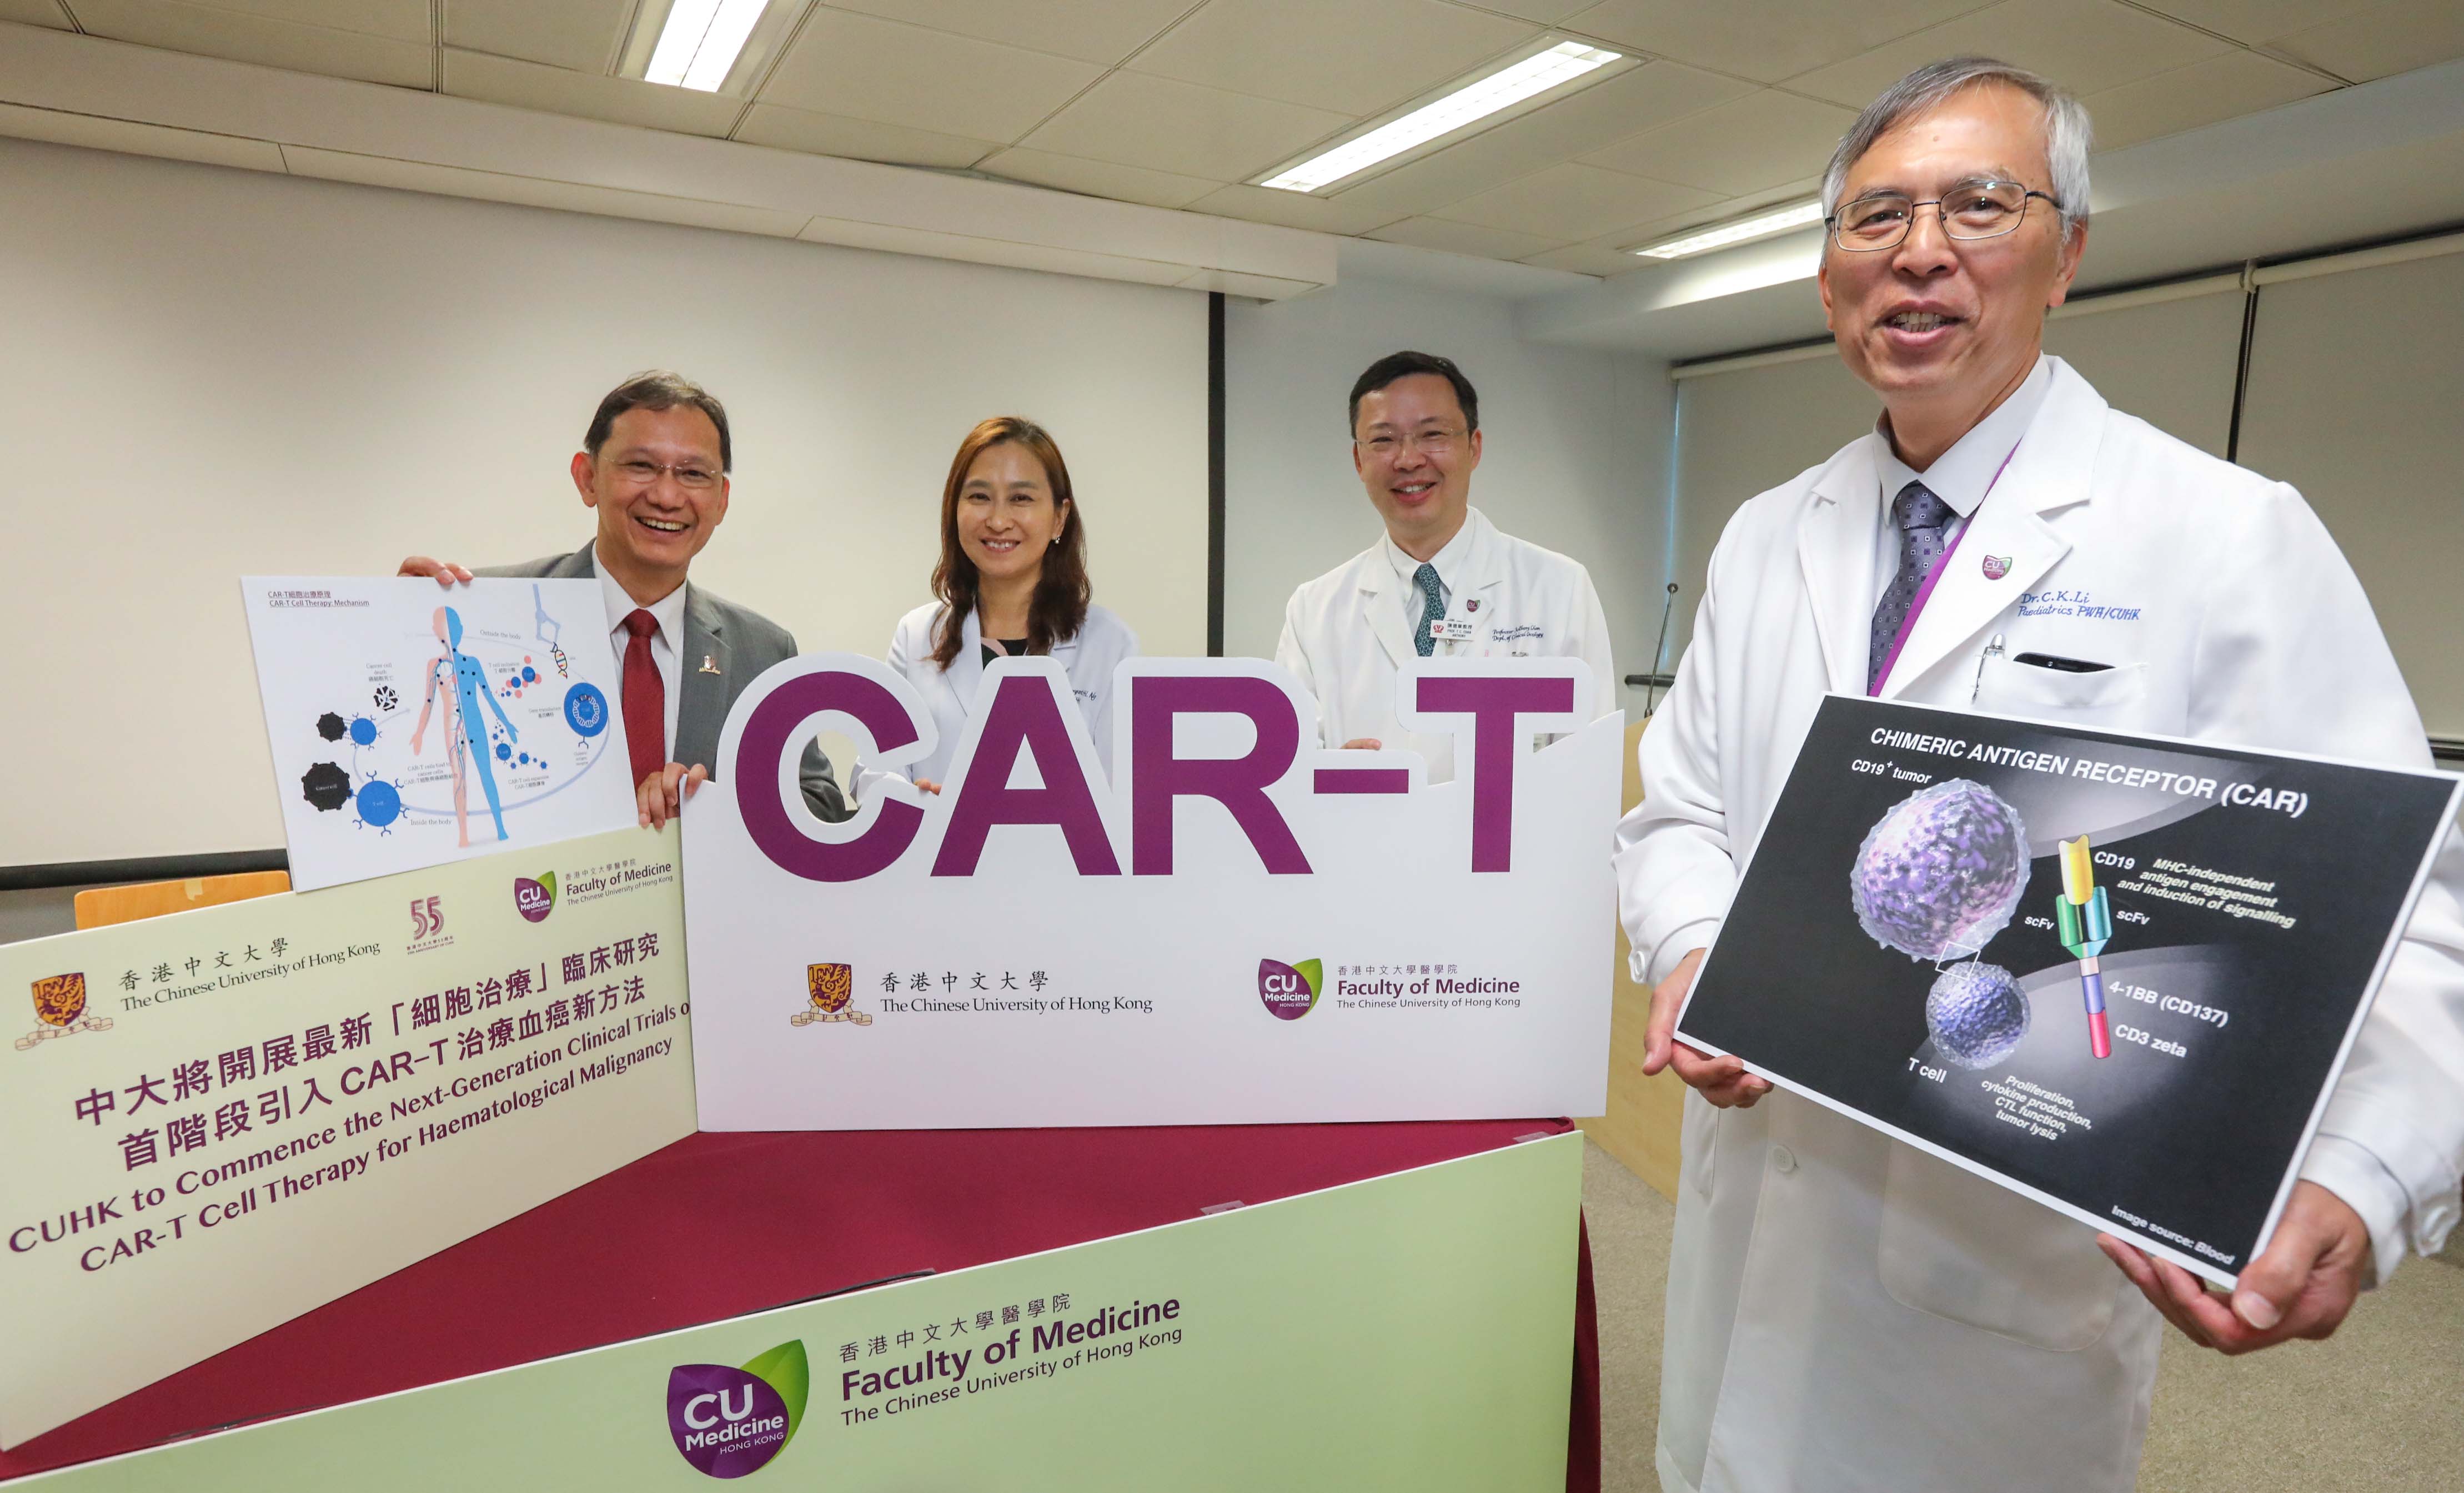 CUHK will commence clinical trials of CAR-T cell therapy, with the first phase targeting patients with haematological malignancy. The plan is to increase the survival rate and prolong overall survival for these patients.